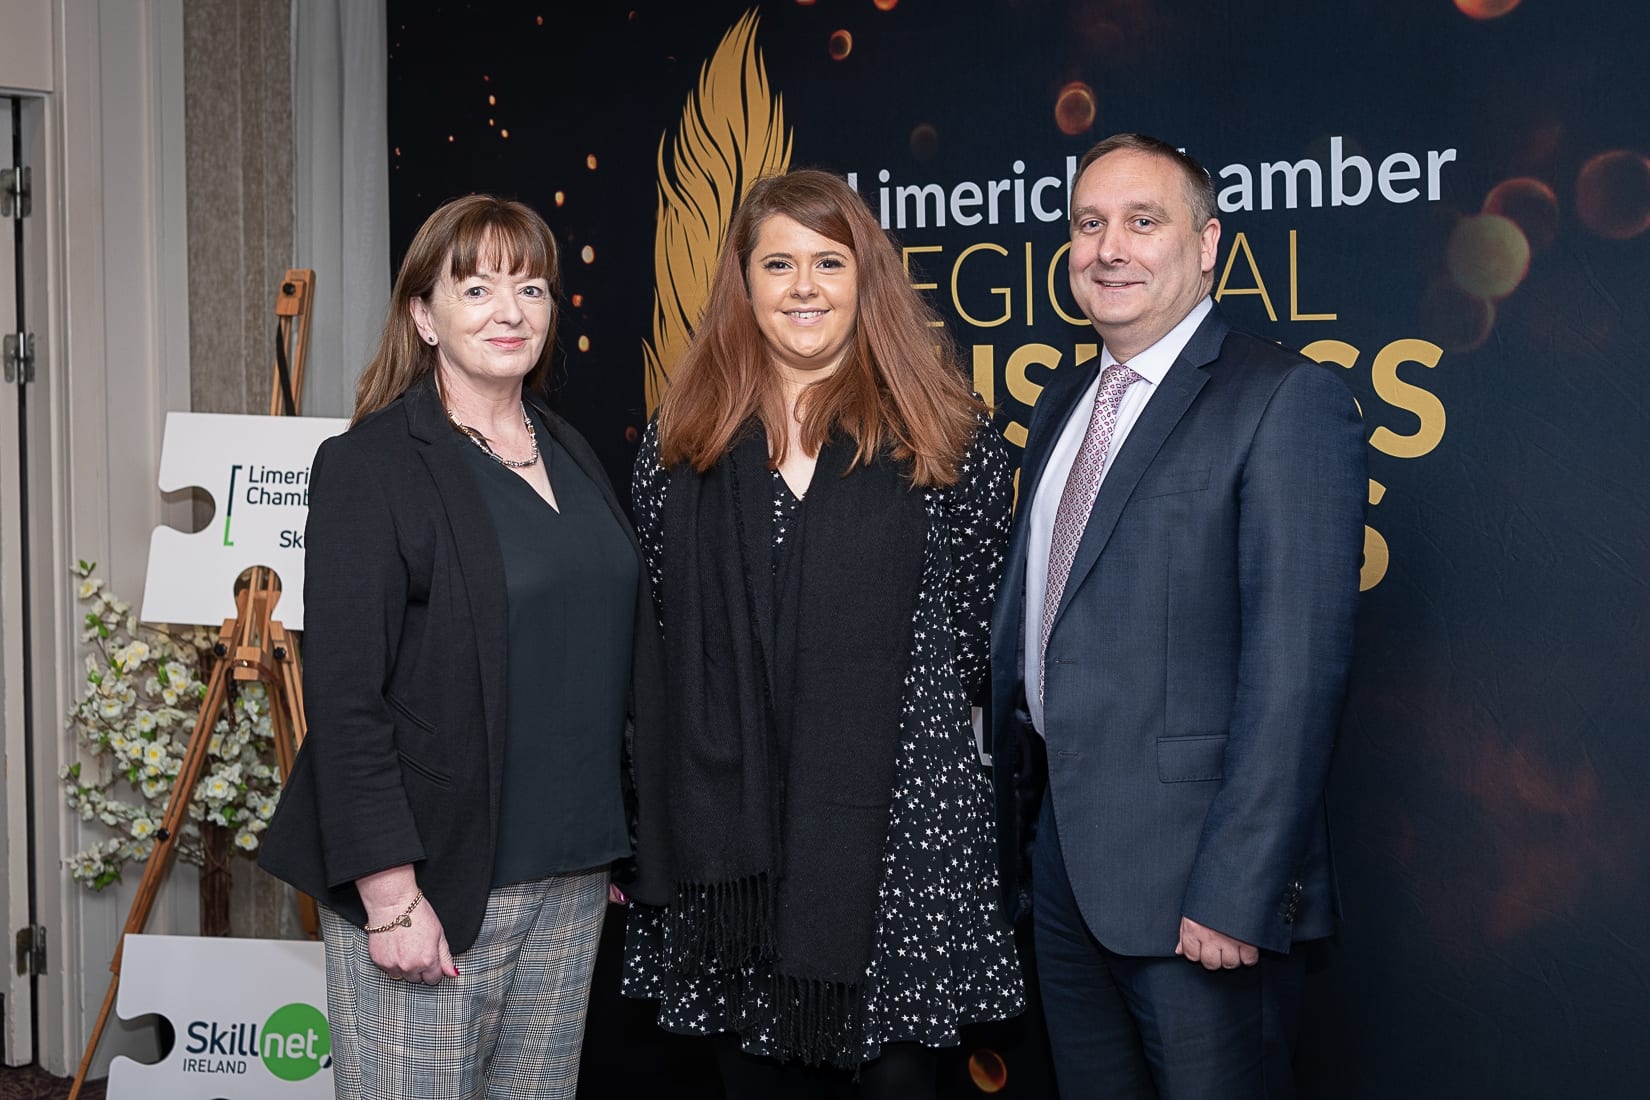 No repro fee-Limerick Chamber President Dinner Shortlist announcement which was held in The Limerick Strand Hotel on Wednesday 16th October  - From Left to Right:  Joan O’Dell - AIB, Caoimhe Moloney - Limerick Chamber, Trevor Moloney - Aib, Shona Keane - AIB
Photo credit Shauna Kennedy